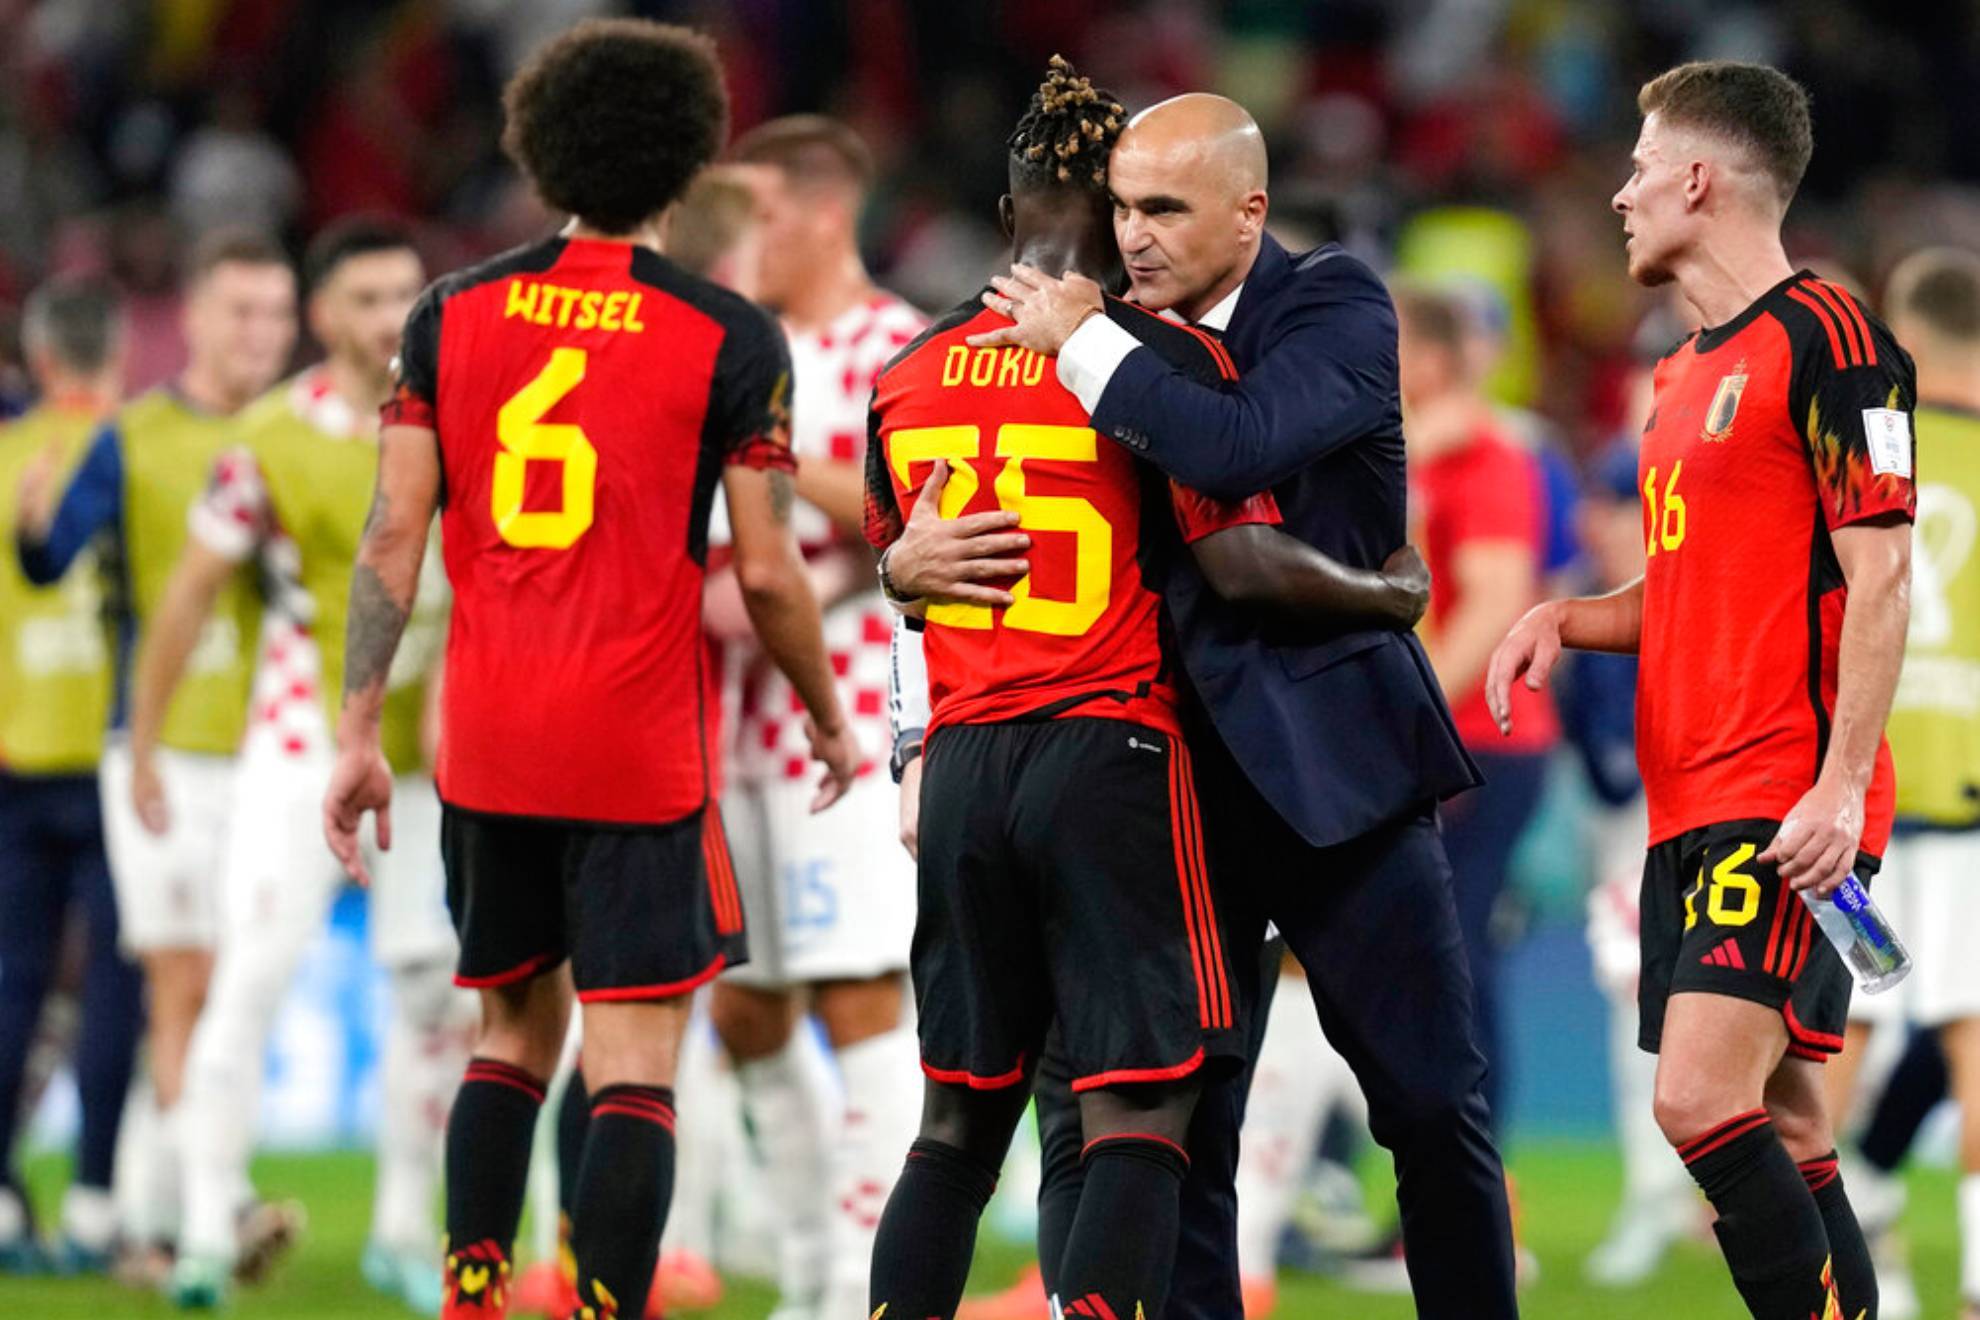 Belgium coach Martinez leaving team after World Cup exit